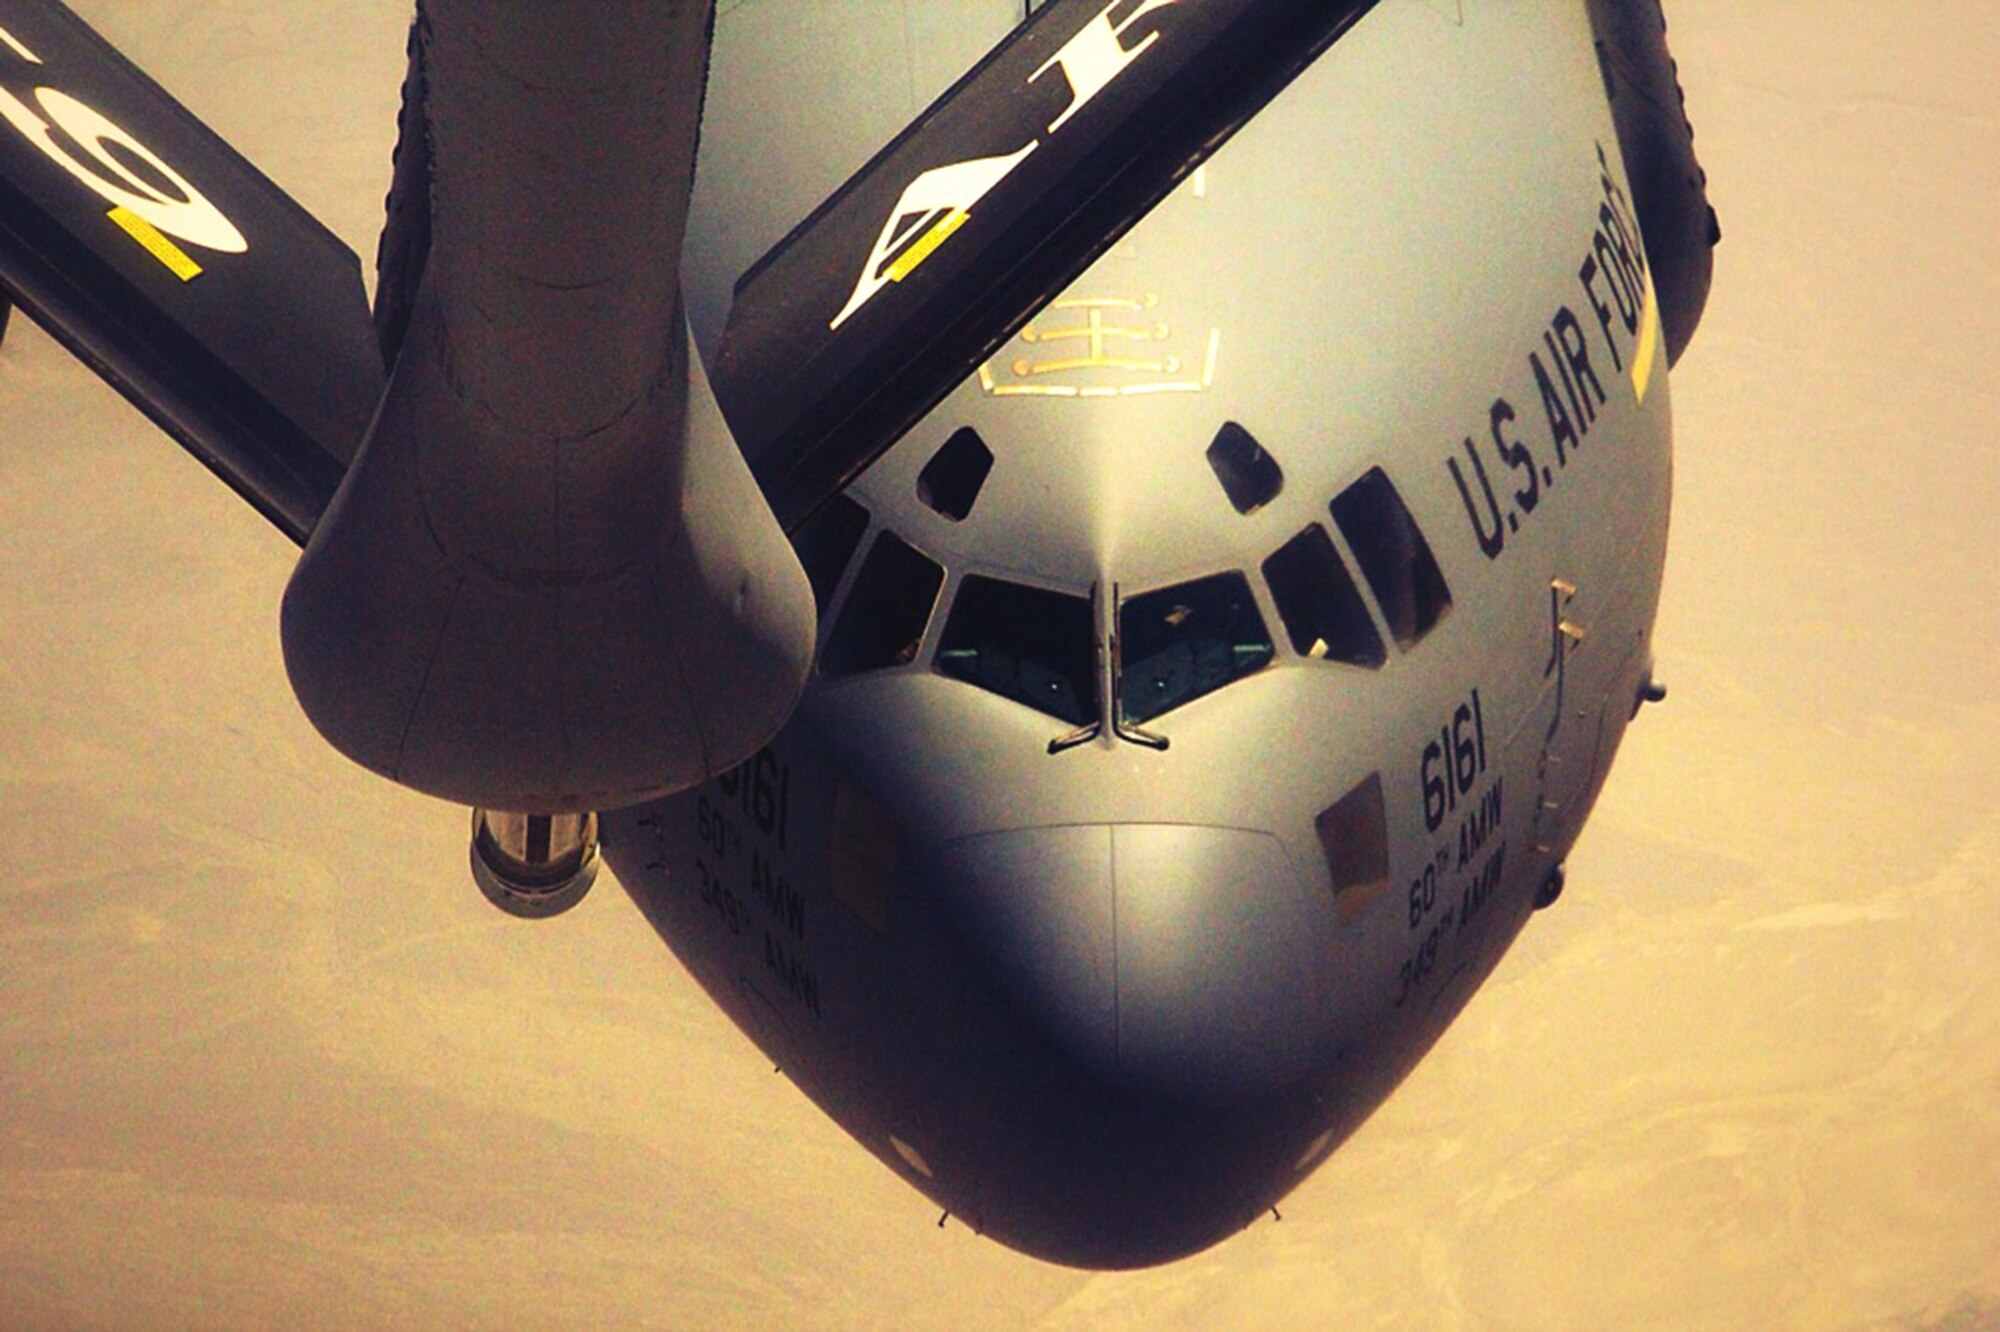 WRIGHT-PATTERSON AIR FORCE BASE, Ohio – A KC-135 Stratotanker from the 459th Air Refueling Wing, Joint Base Andrews, Md., refuels a C-17 Globemaster III over Southwest Asia. The C-17 is being flown by members of the 89th Airlift Squadron currently augmenting an active duty crew while deployed with the 385th Air Expeditionary Group, Detachment 1. (Courtesy photo)